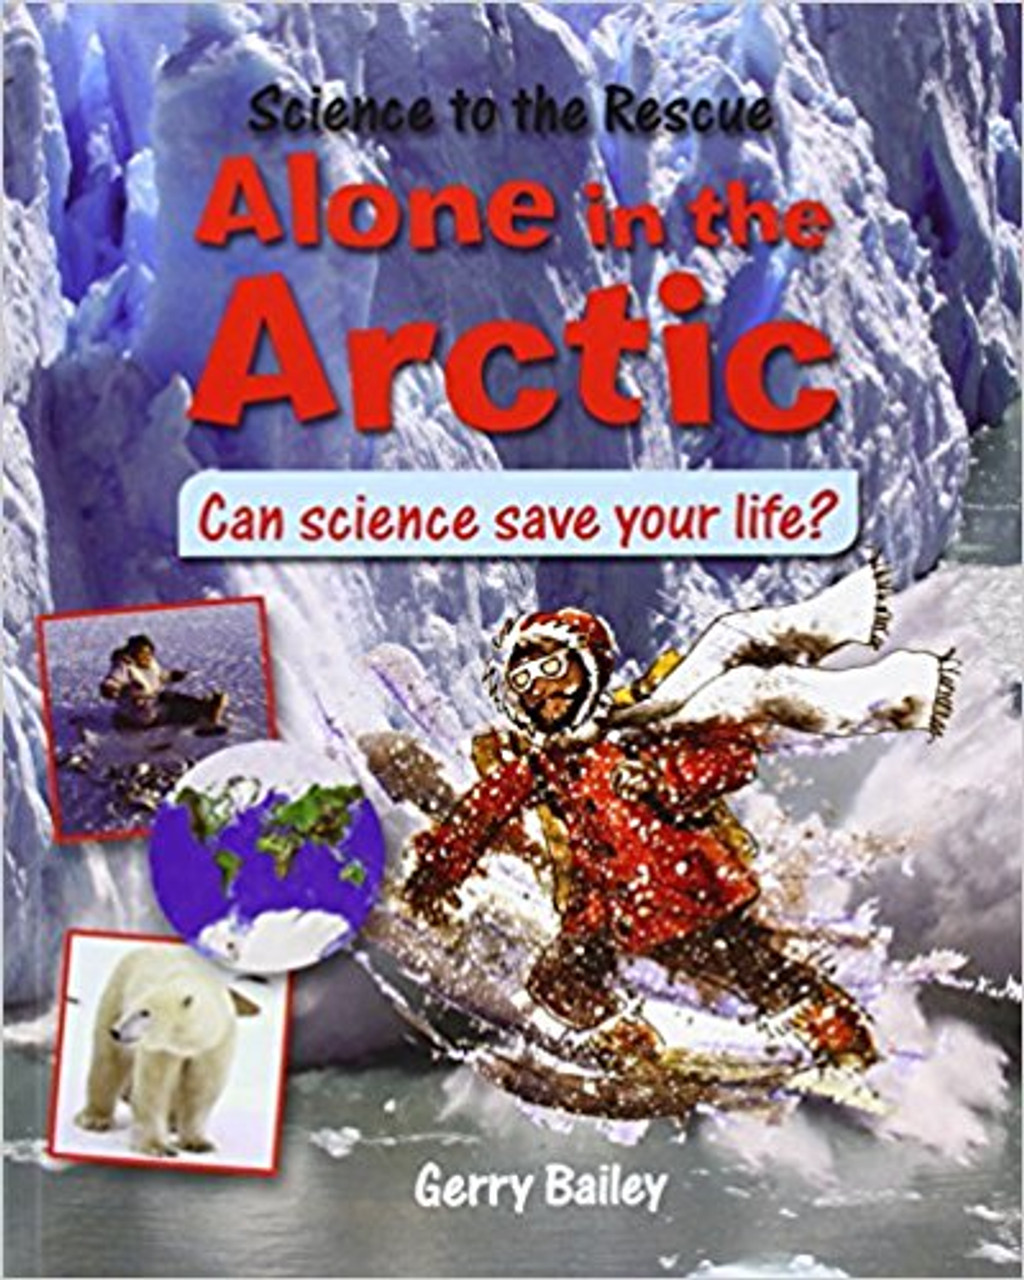 Alone in the Arctic by Gerry Bailey